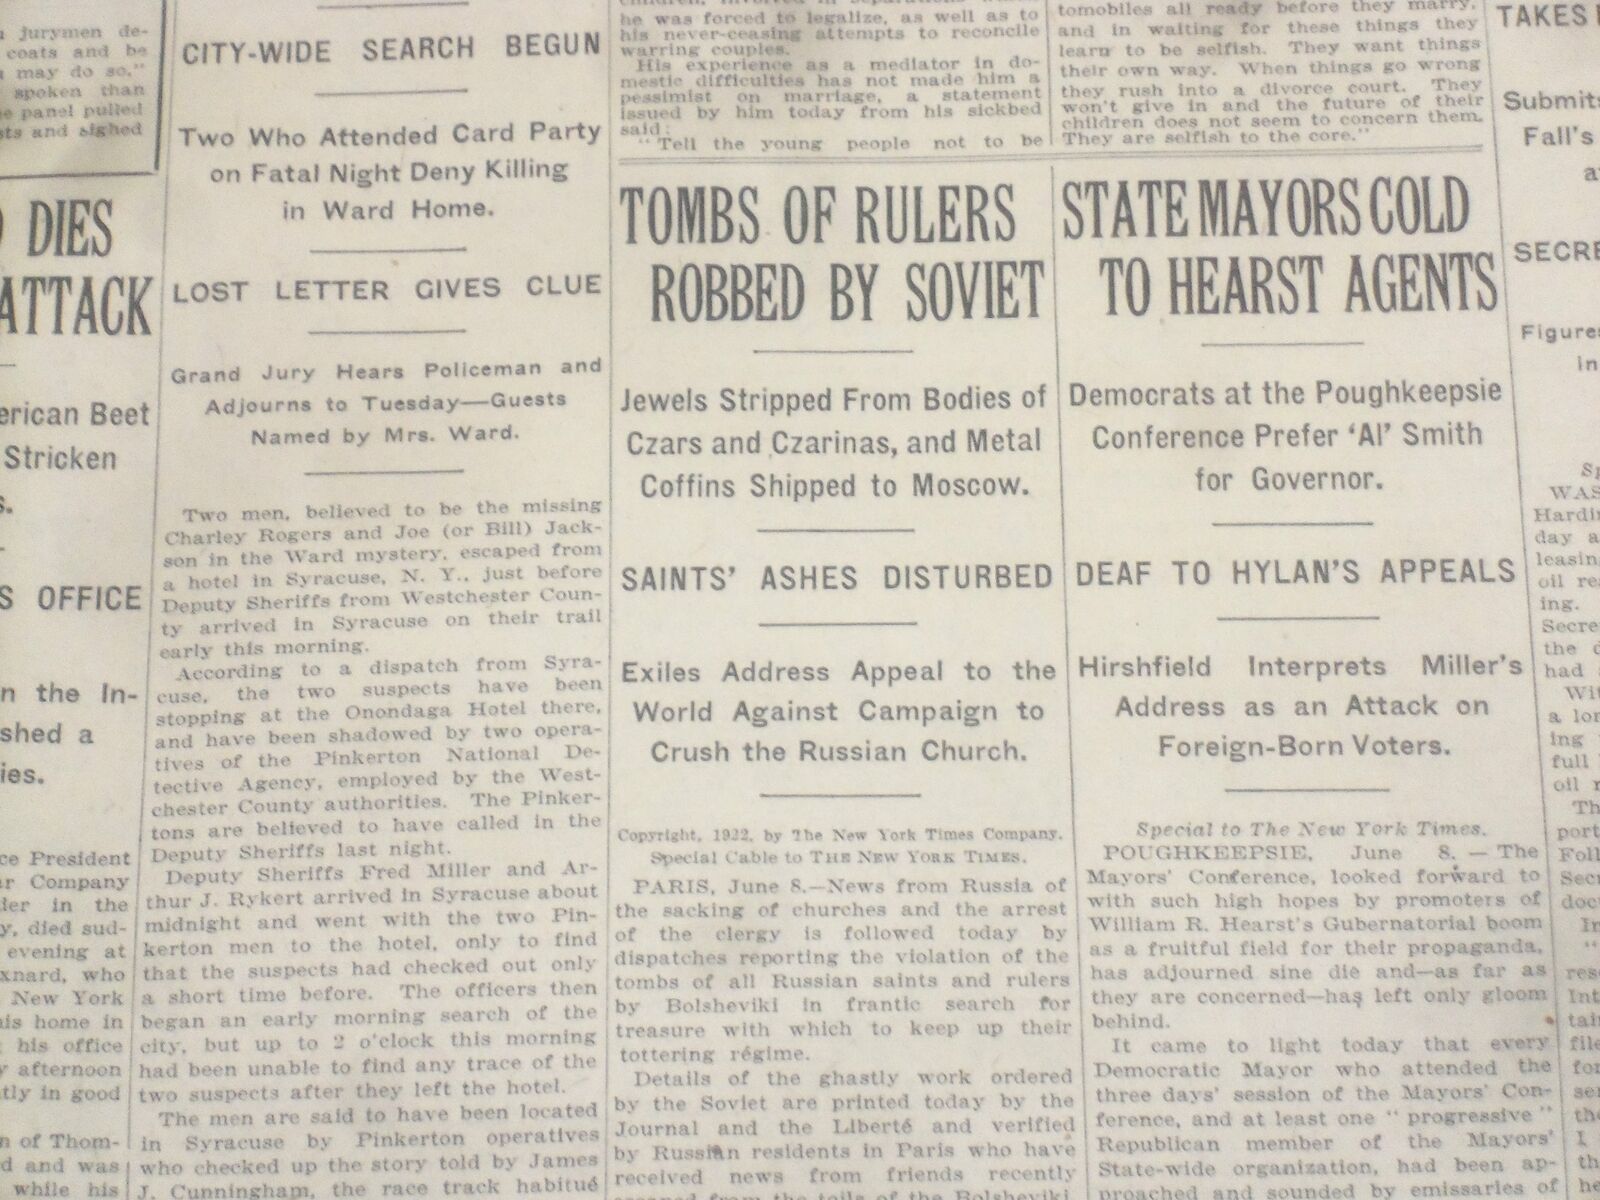 1922 JUNE 9 NEW YORK TIMES - TOMBS OF RULERS ROBBED BY SOVIET - NT 8396